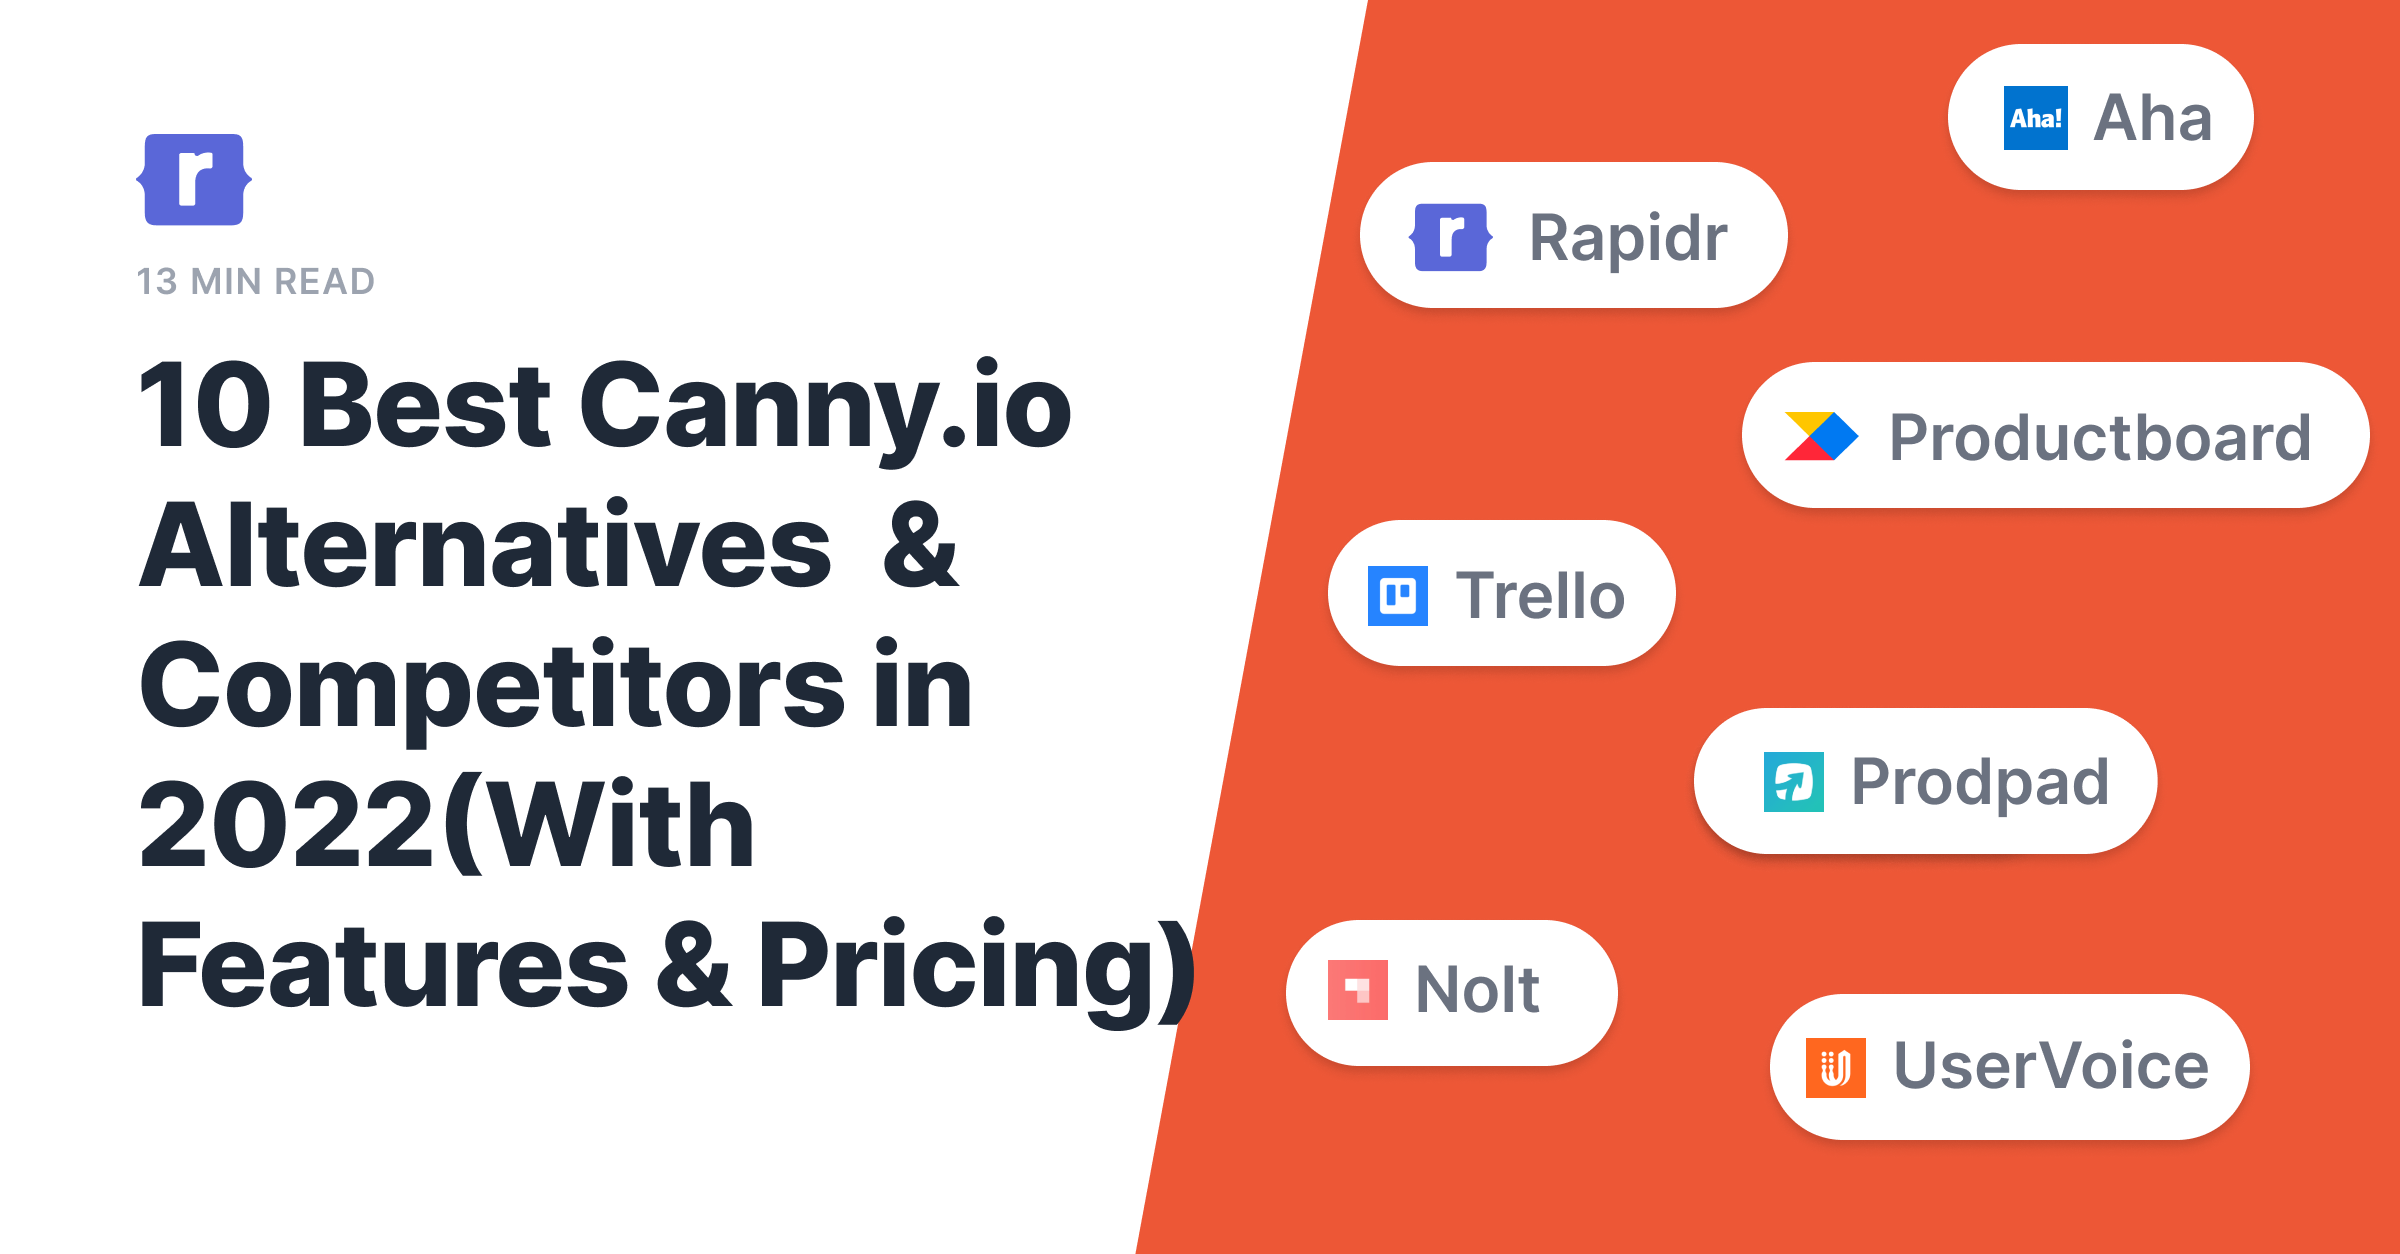 10 Best Canny.io Alternatives & Competitors in 2022 (With Features & Pricing)